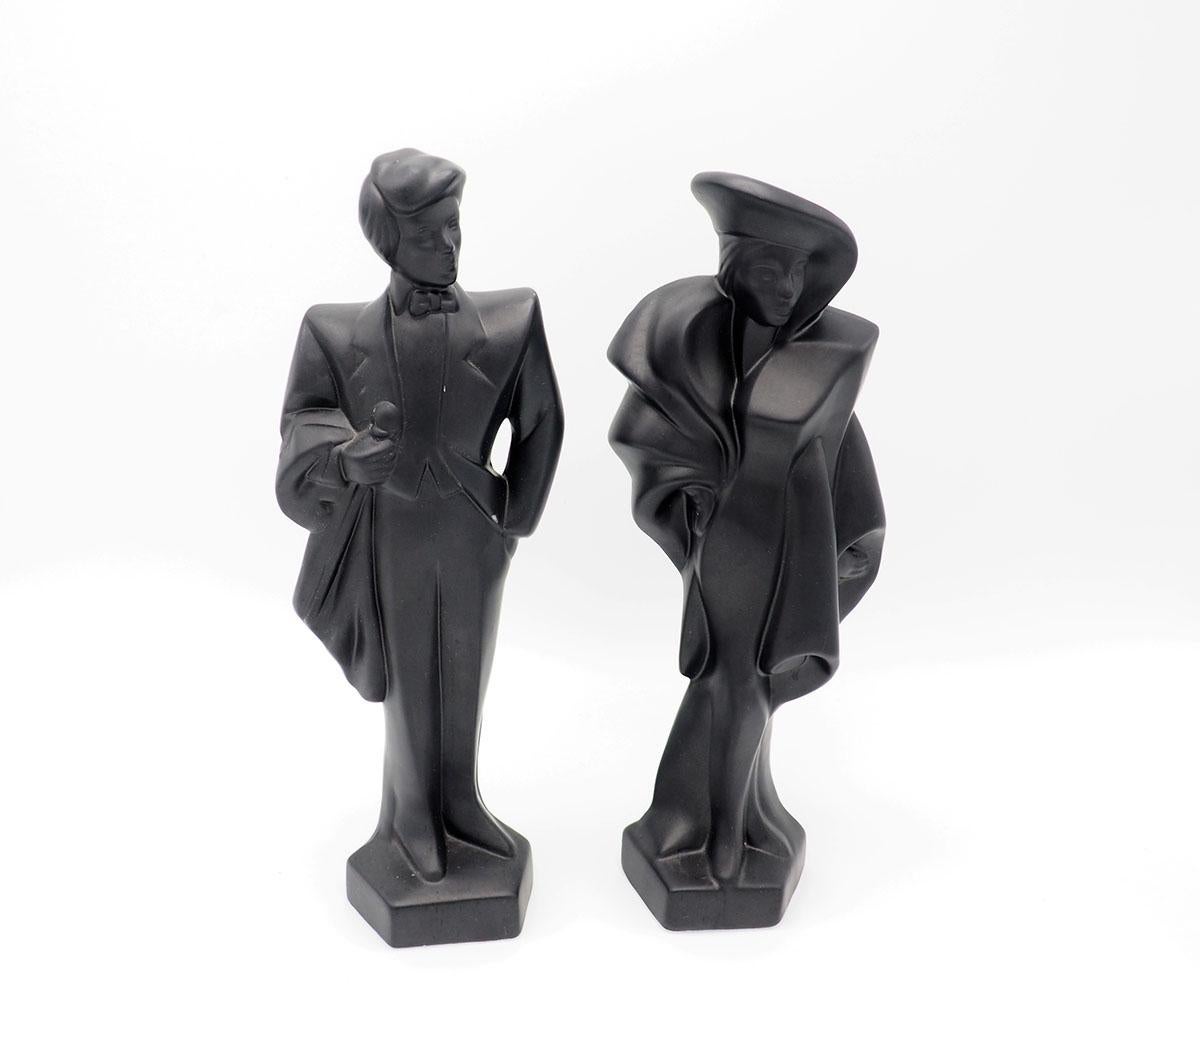 1980s figurines of a man and woman in art deco gala clothes.

The matte black figurines are made of plaster, made in the 1980s.

In the 80s and 90s Lindsay B was a leading Avant Garde artist, these figurines are a popular answer to that.

They were